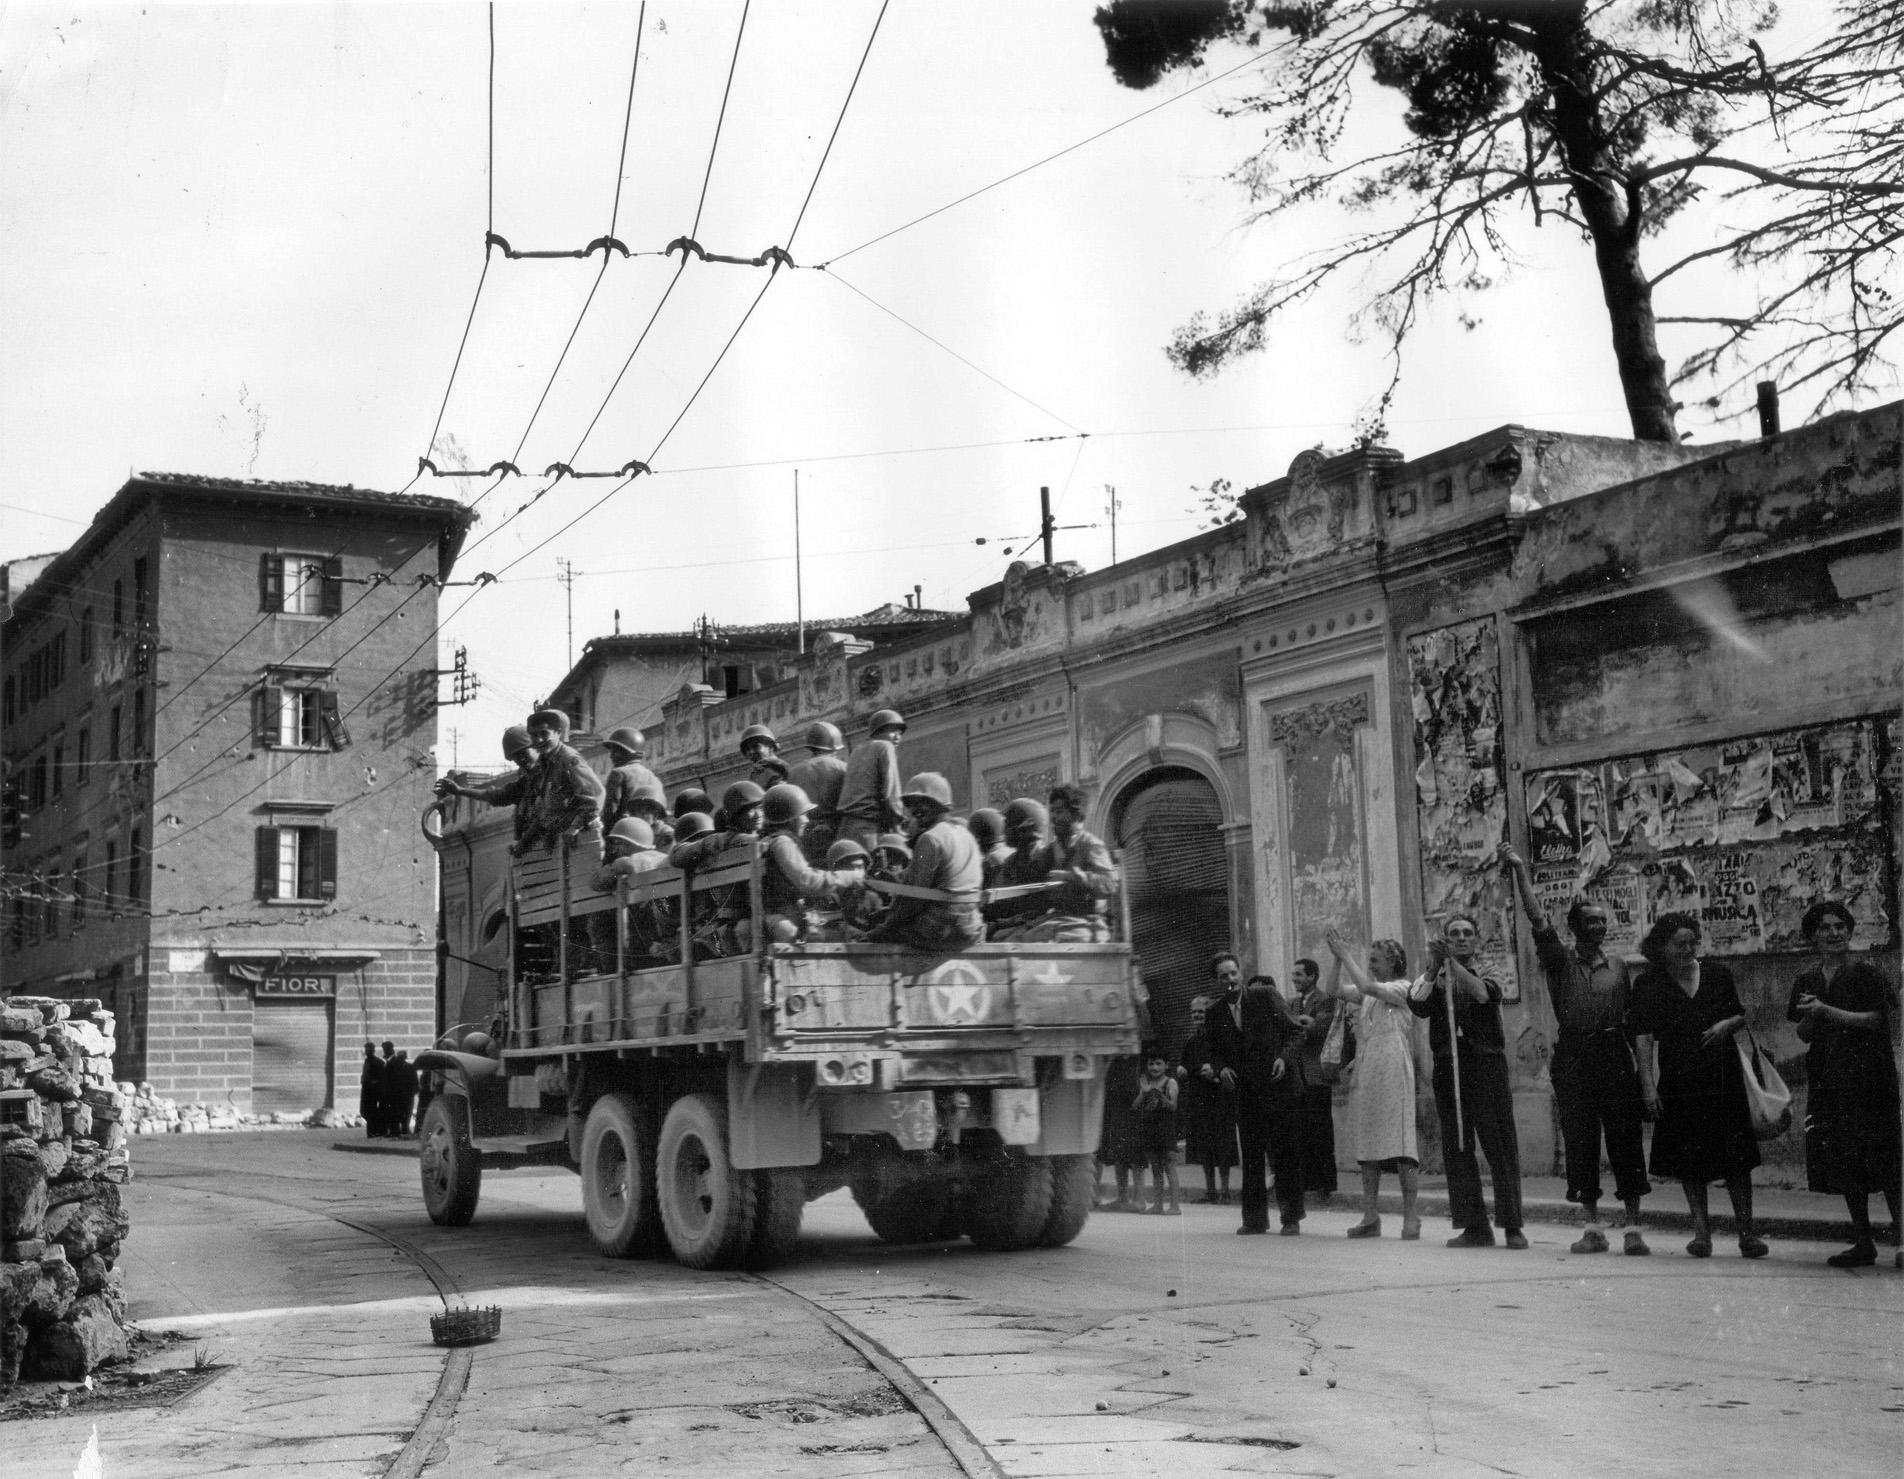 Despite suffering discrimination at home, Nisei troops were often welcomed as liberators in Europe. Here civilians wave to soldiers of the 100th Infantry Battalion as they arrive in Livorno, July 19, 1944. 